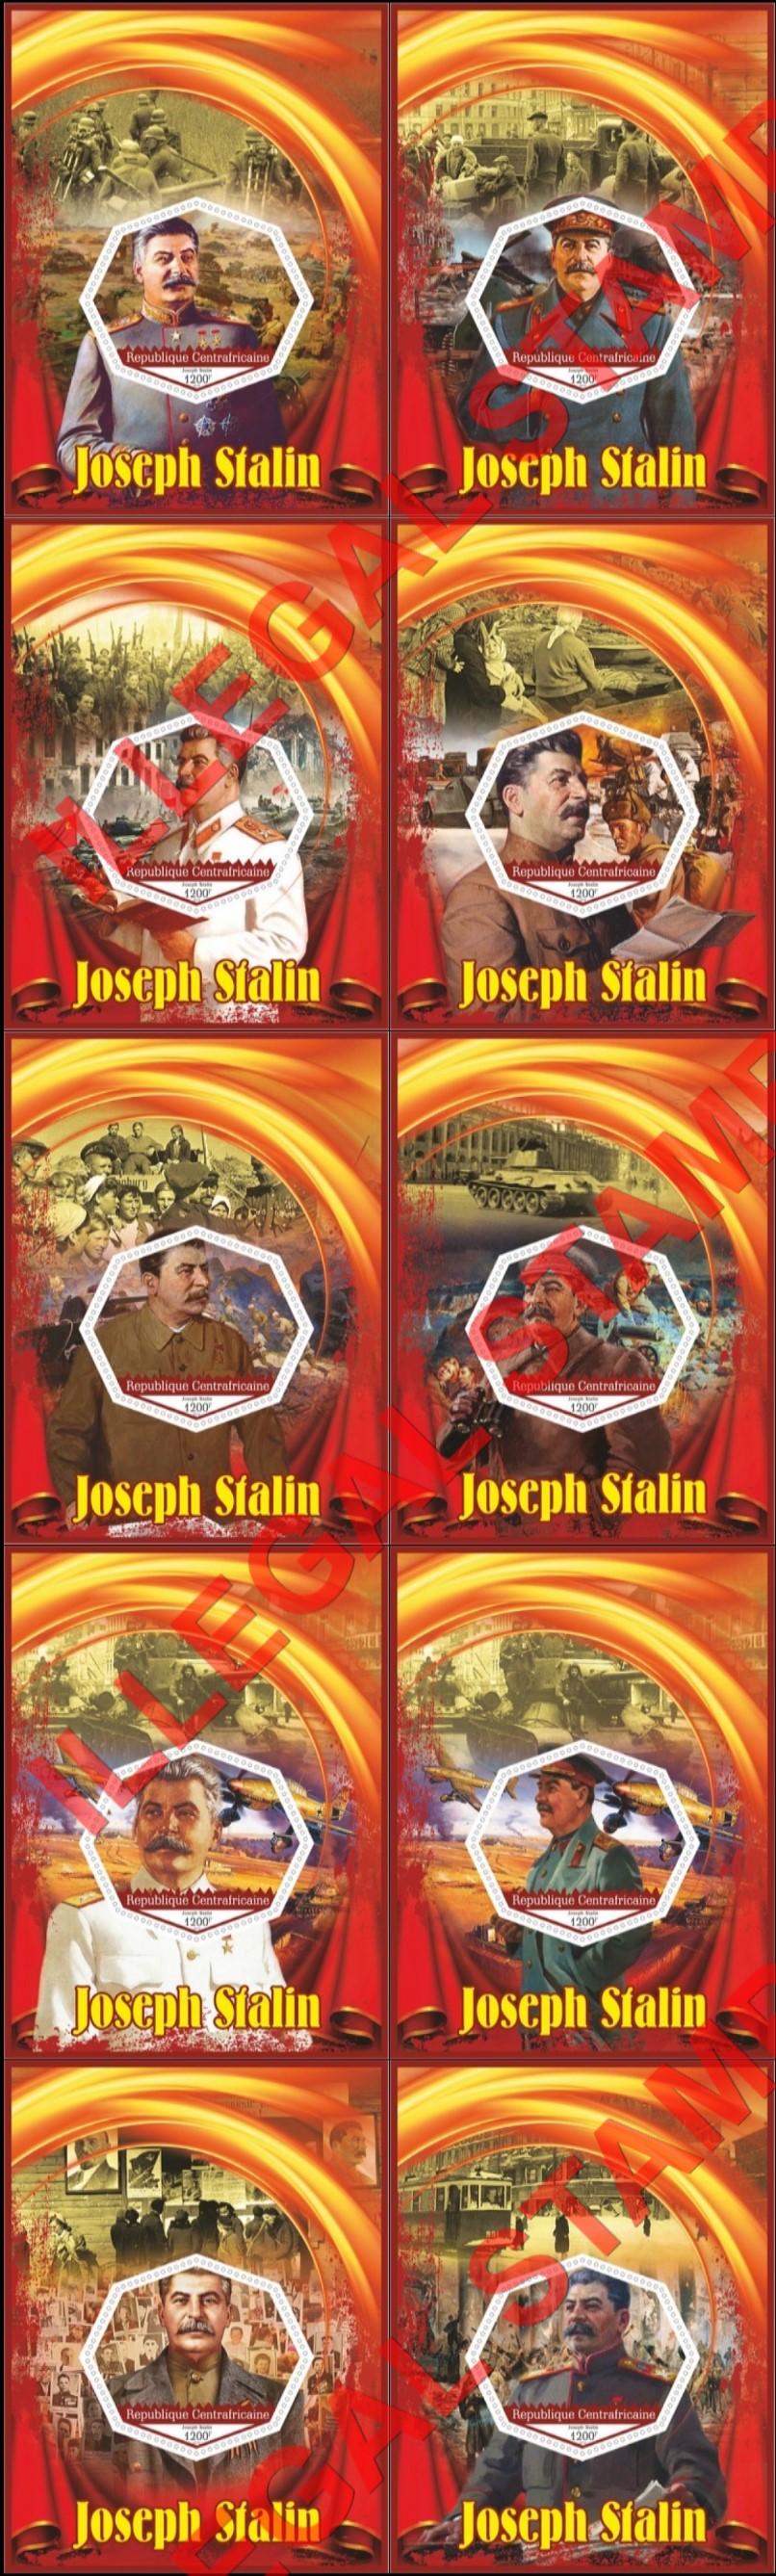 Central African Republic 2017 Joseph Stalin (different a) Illegal Stamp Souvenir Sheets of 1